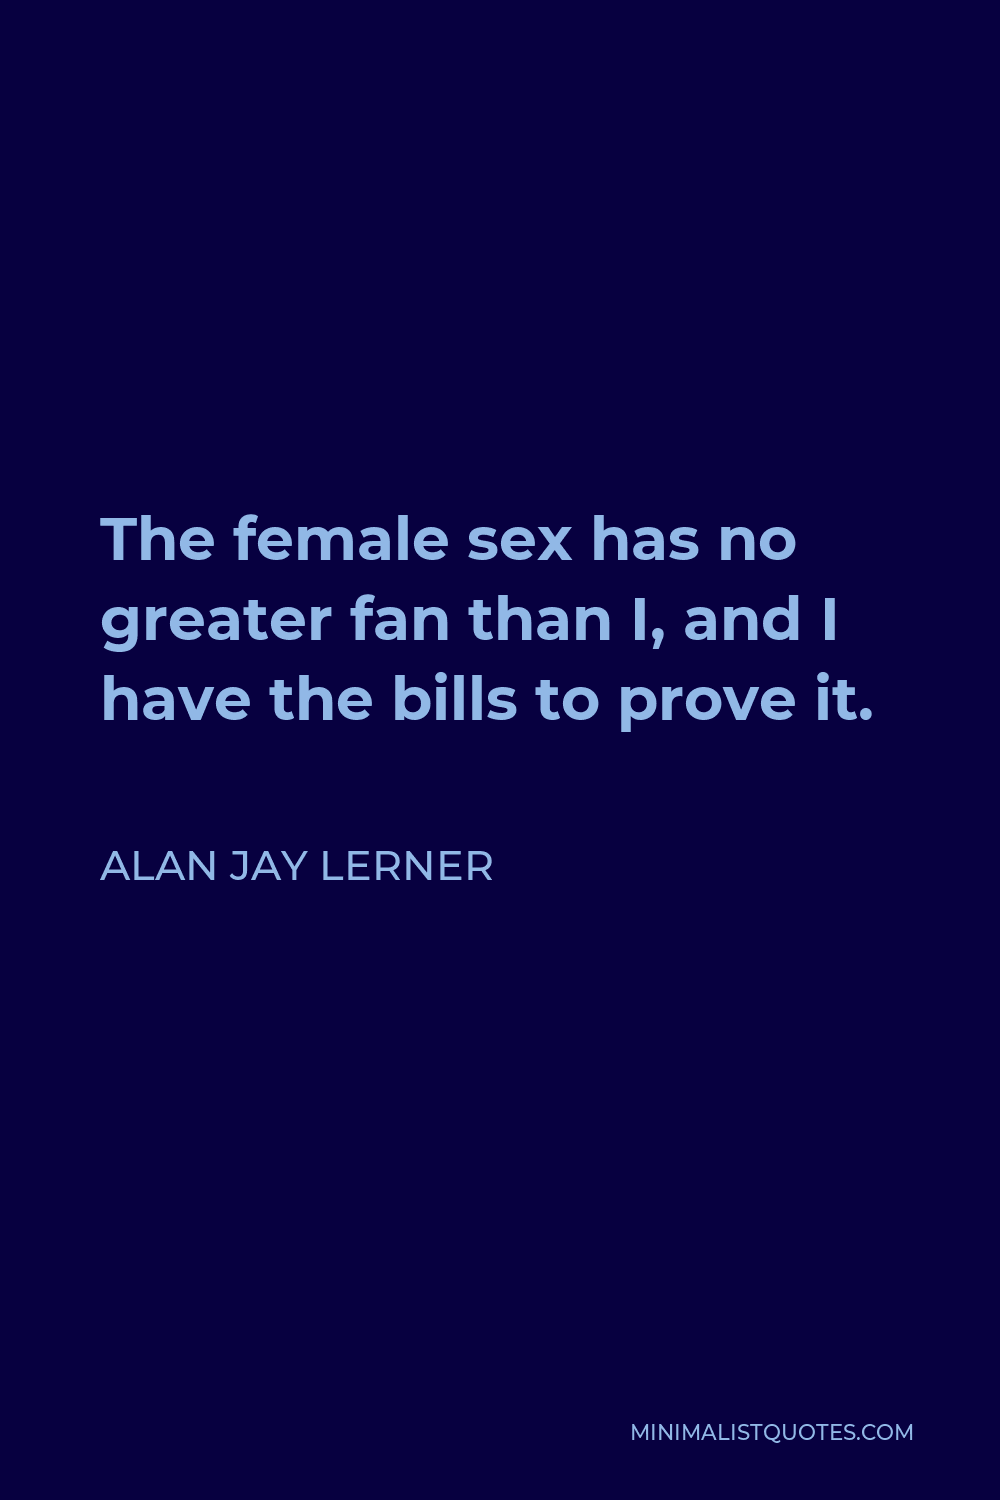 Alan Jay Lerner Quote - The female sex has no greater fan than I, and I have the bills to prove it.